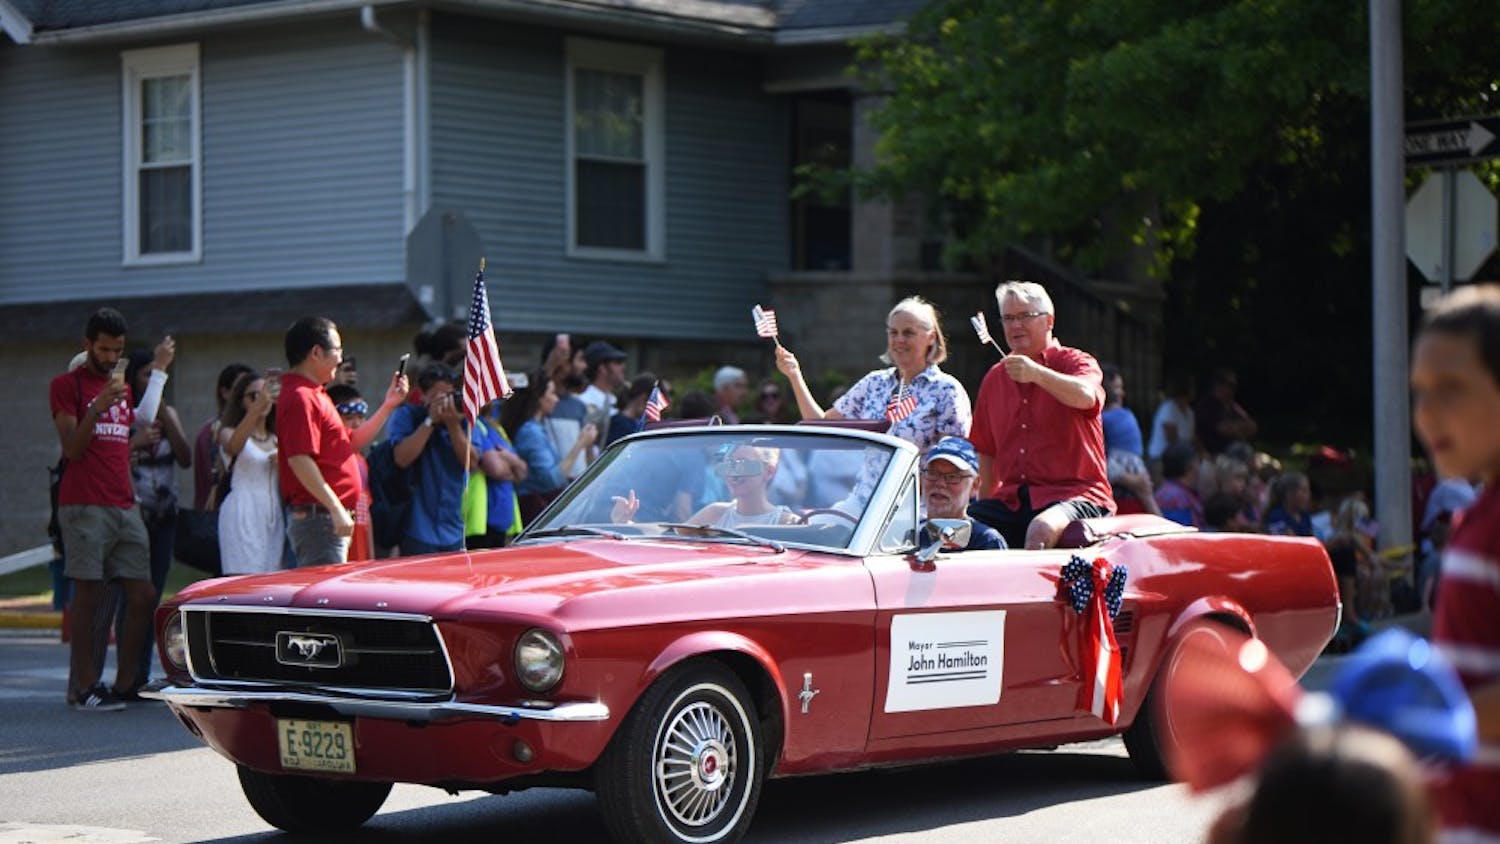 Bloomington’s mayor John Hamilton and his wife start the 4th of July parade on Tuesday. The parade attracted hundreds of visitors to sit and watch different floats parade downtown.